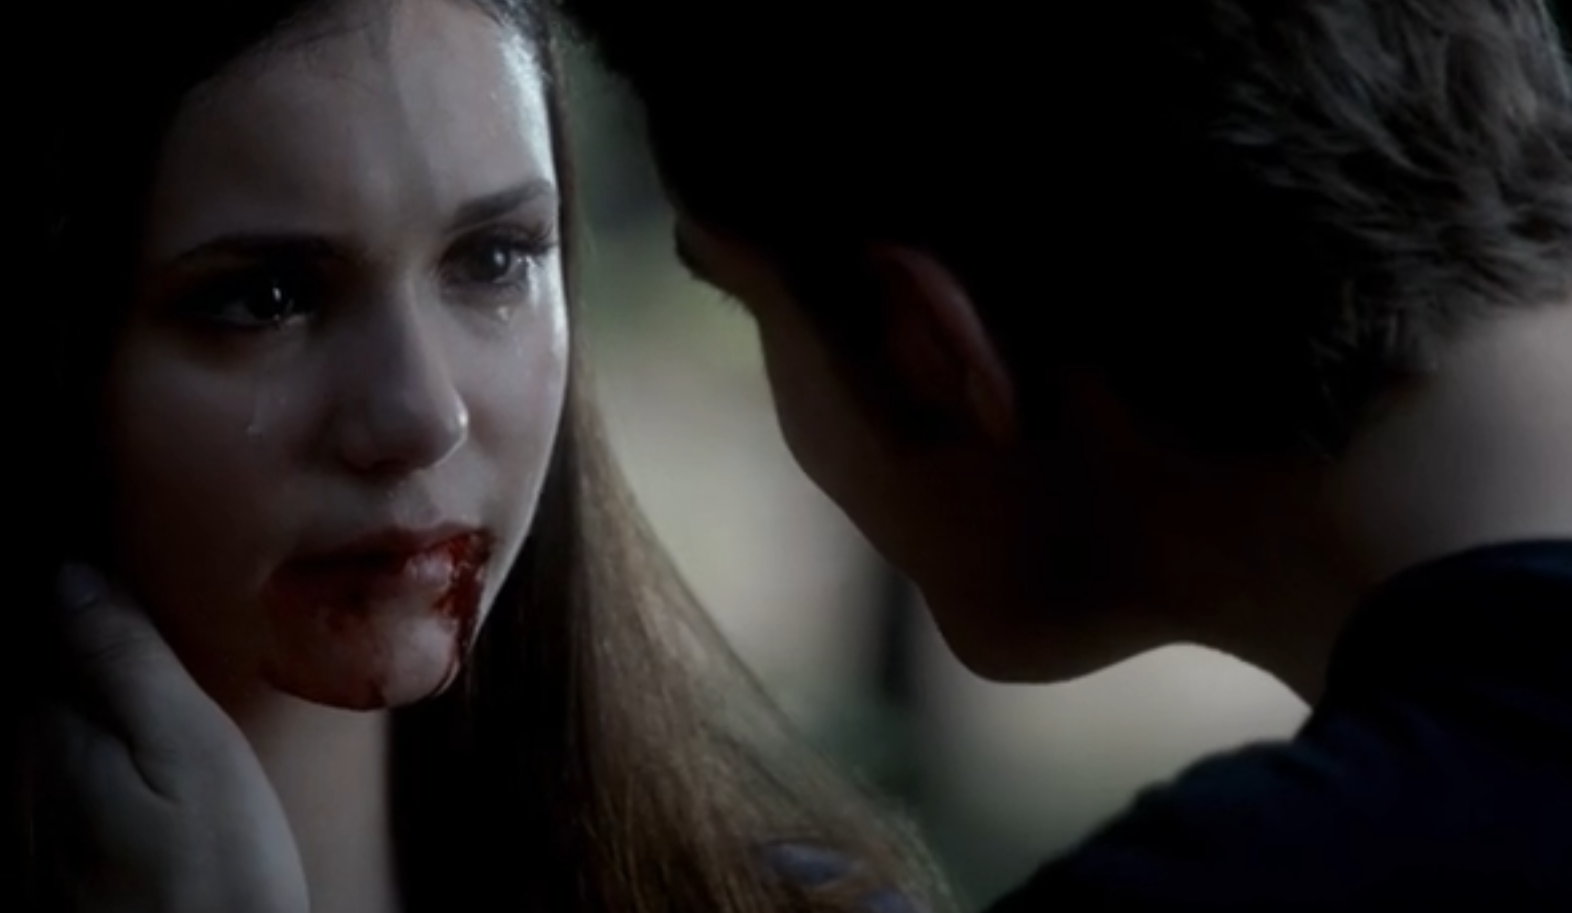 The Vampire diaries S04E02 - Elena feeds with Stefan 